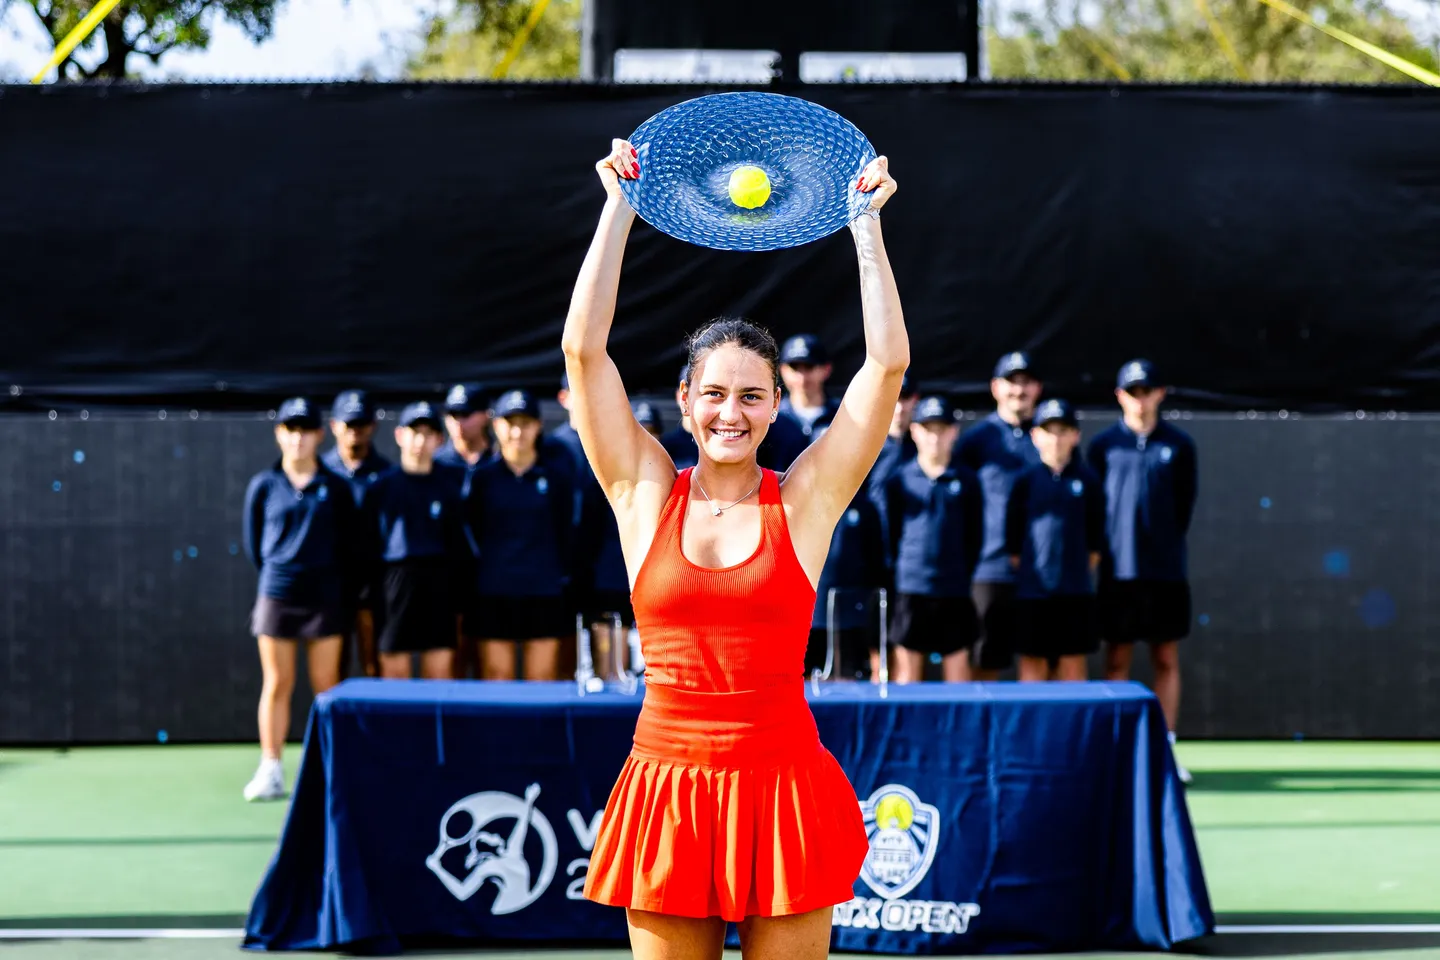 Ukraine's Marta Kostyuk won her first WTA title earlier this month, beating Russia's Varvara Gracheva in the final of the Austin Open, a victory she dedicated to those 